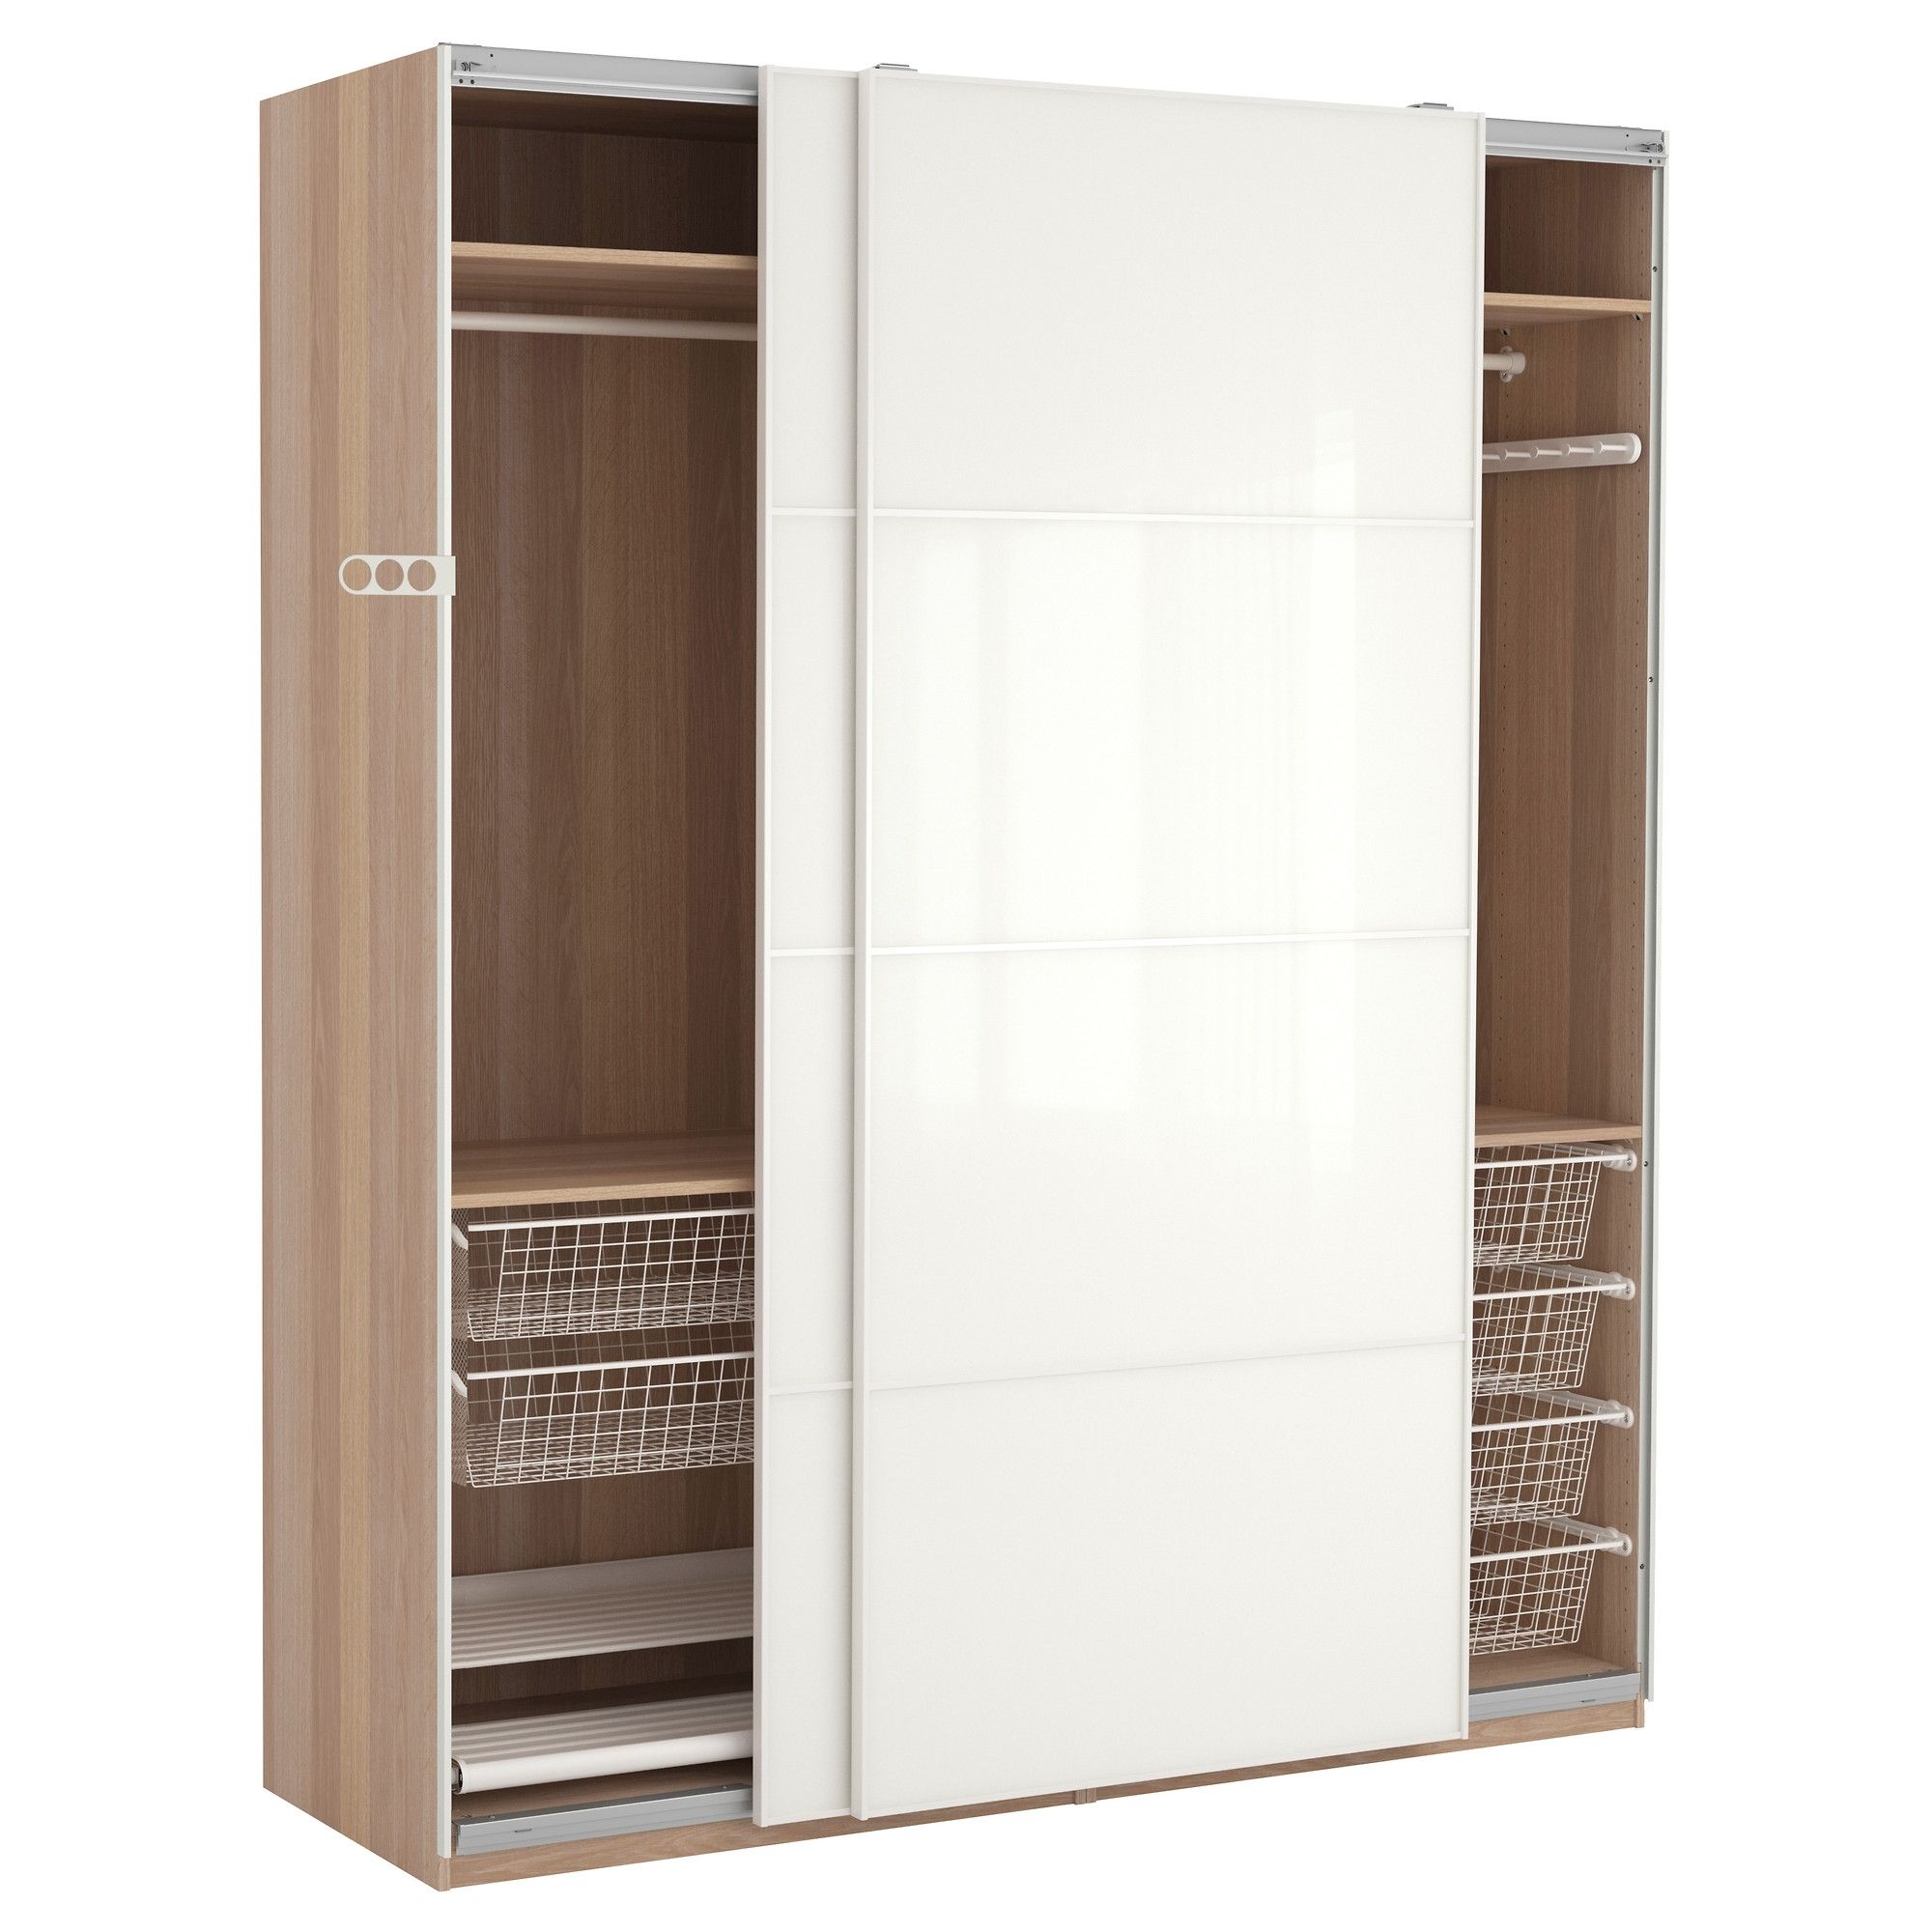 Favorite Wardrobes With Drawers And Shelves Regarding Furniture: Brilliant Simple White Wardrobe Cabinet For Your Room (View 9 of 15)